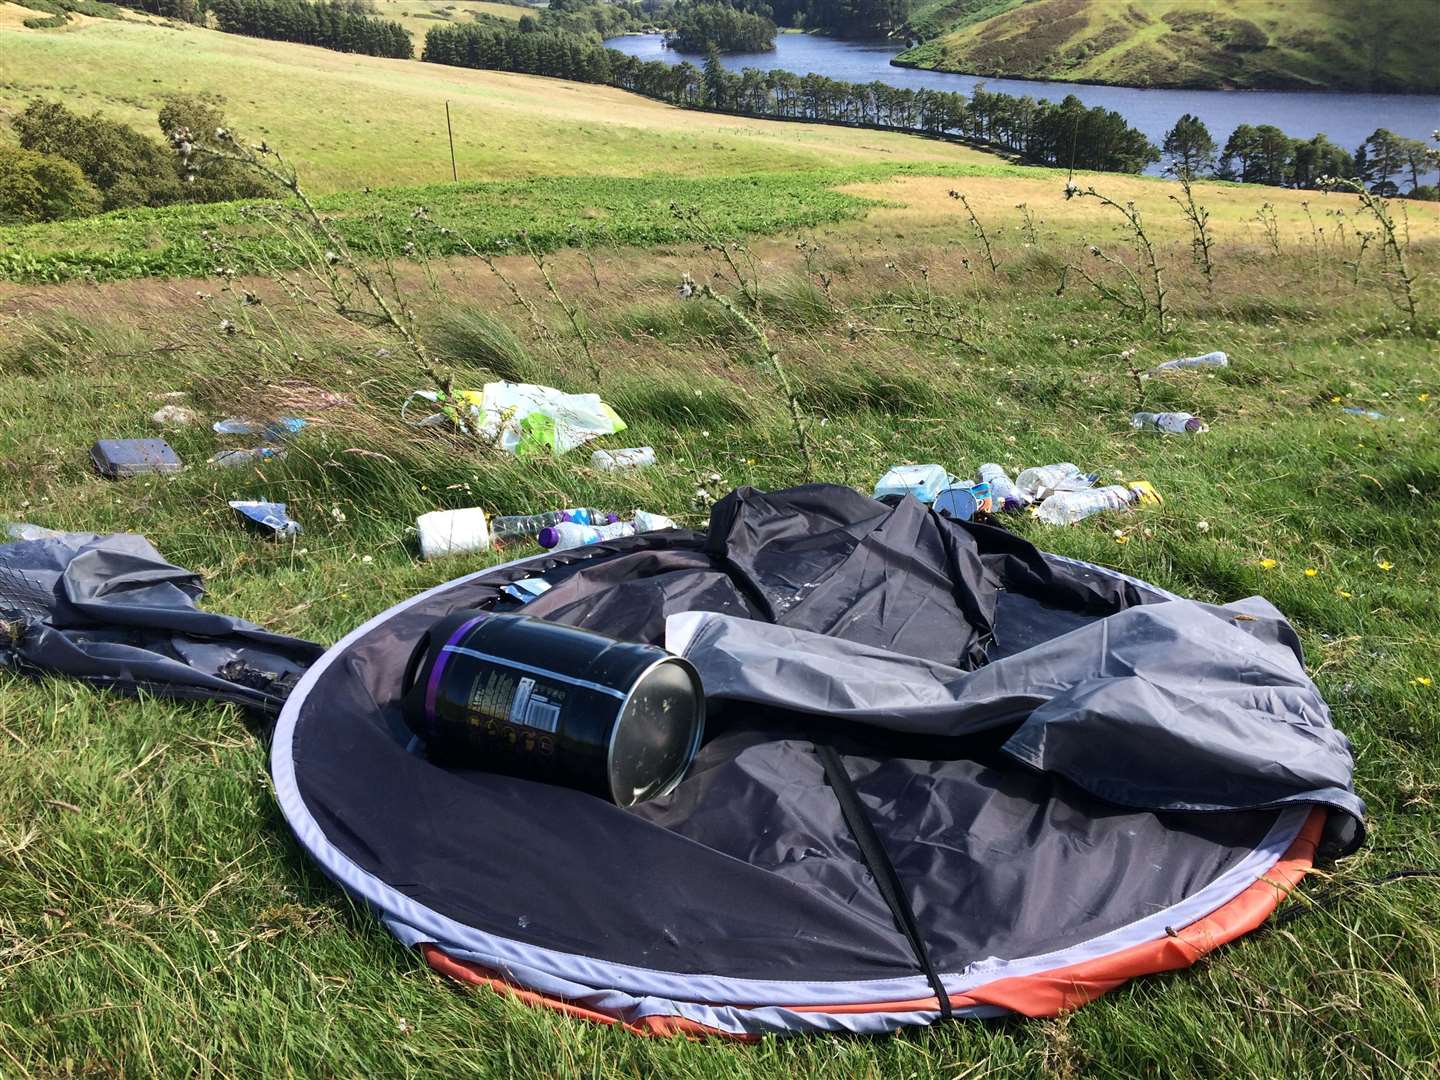 Rubbish left behind by irresponsible wild campers.